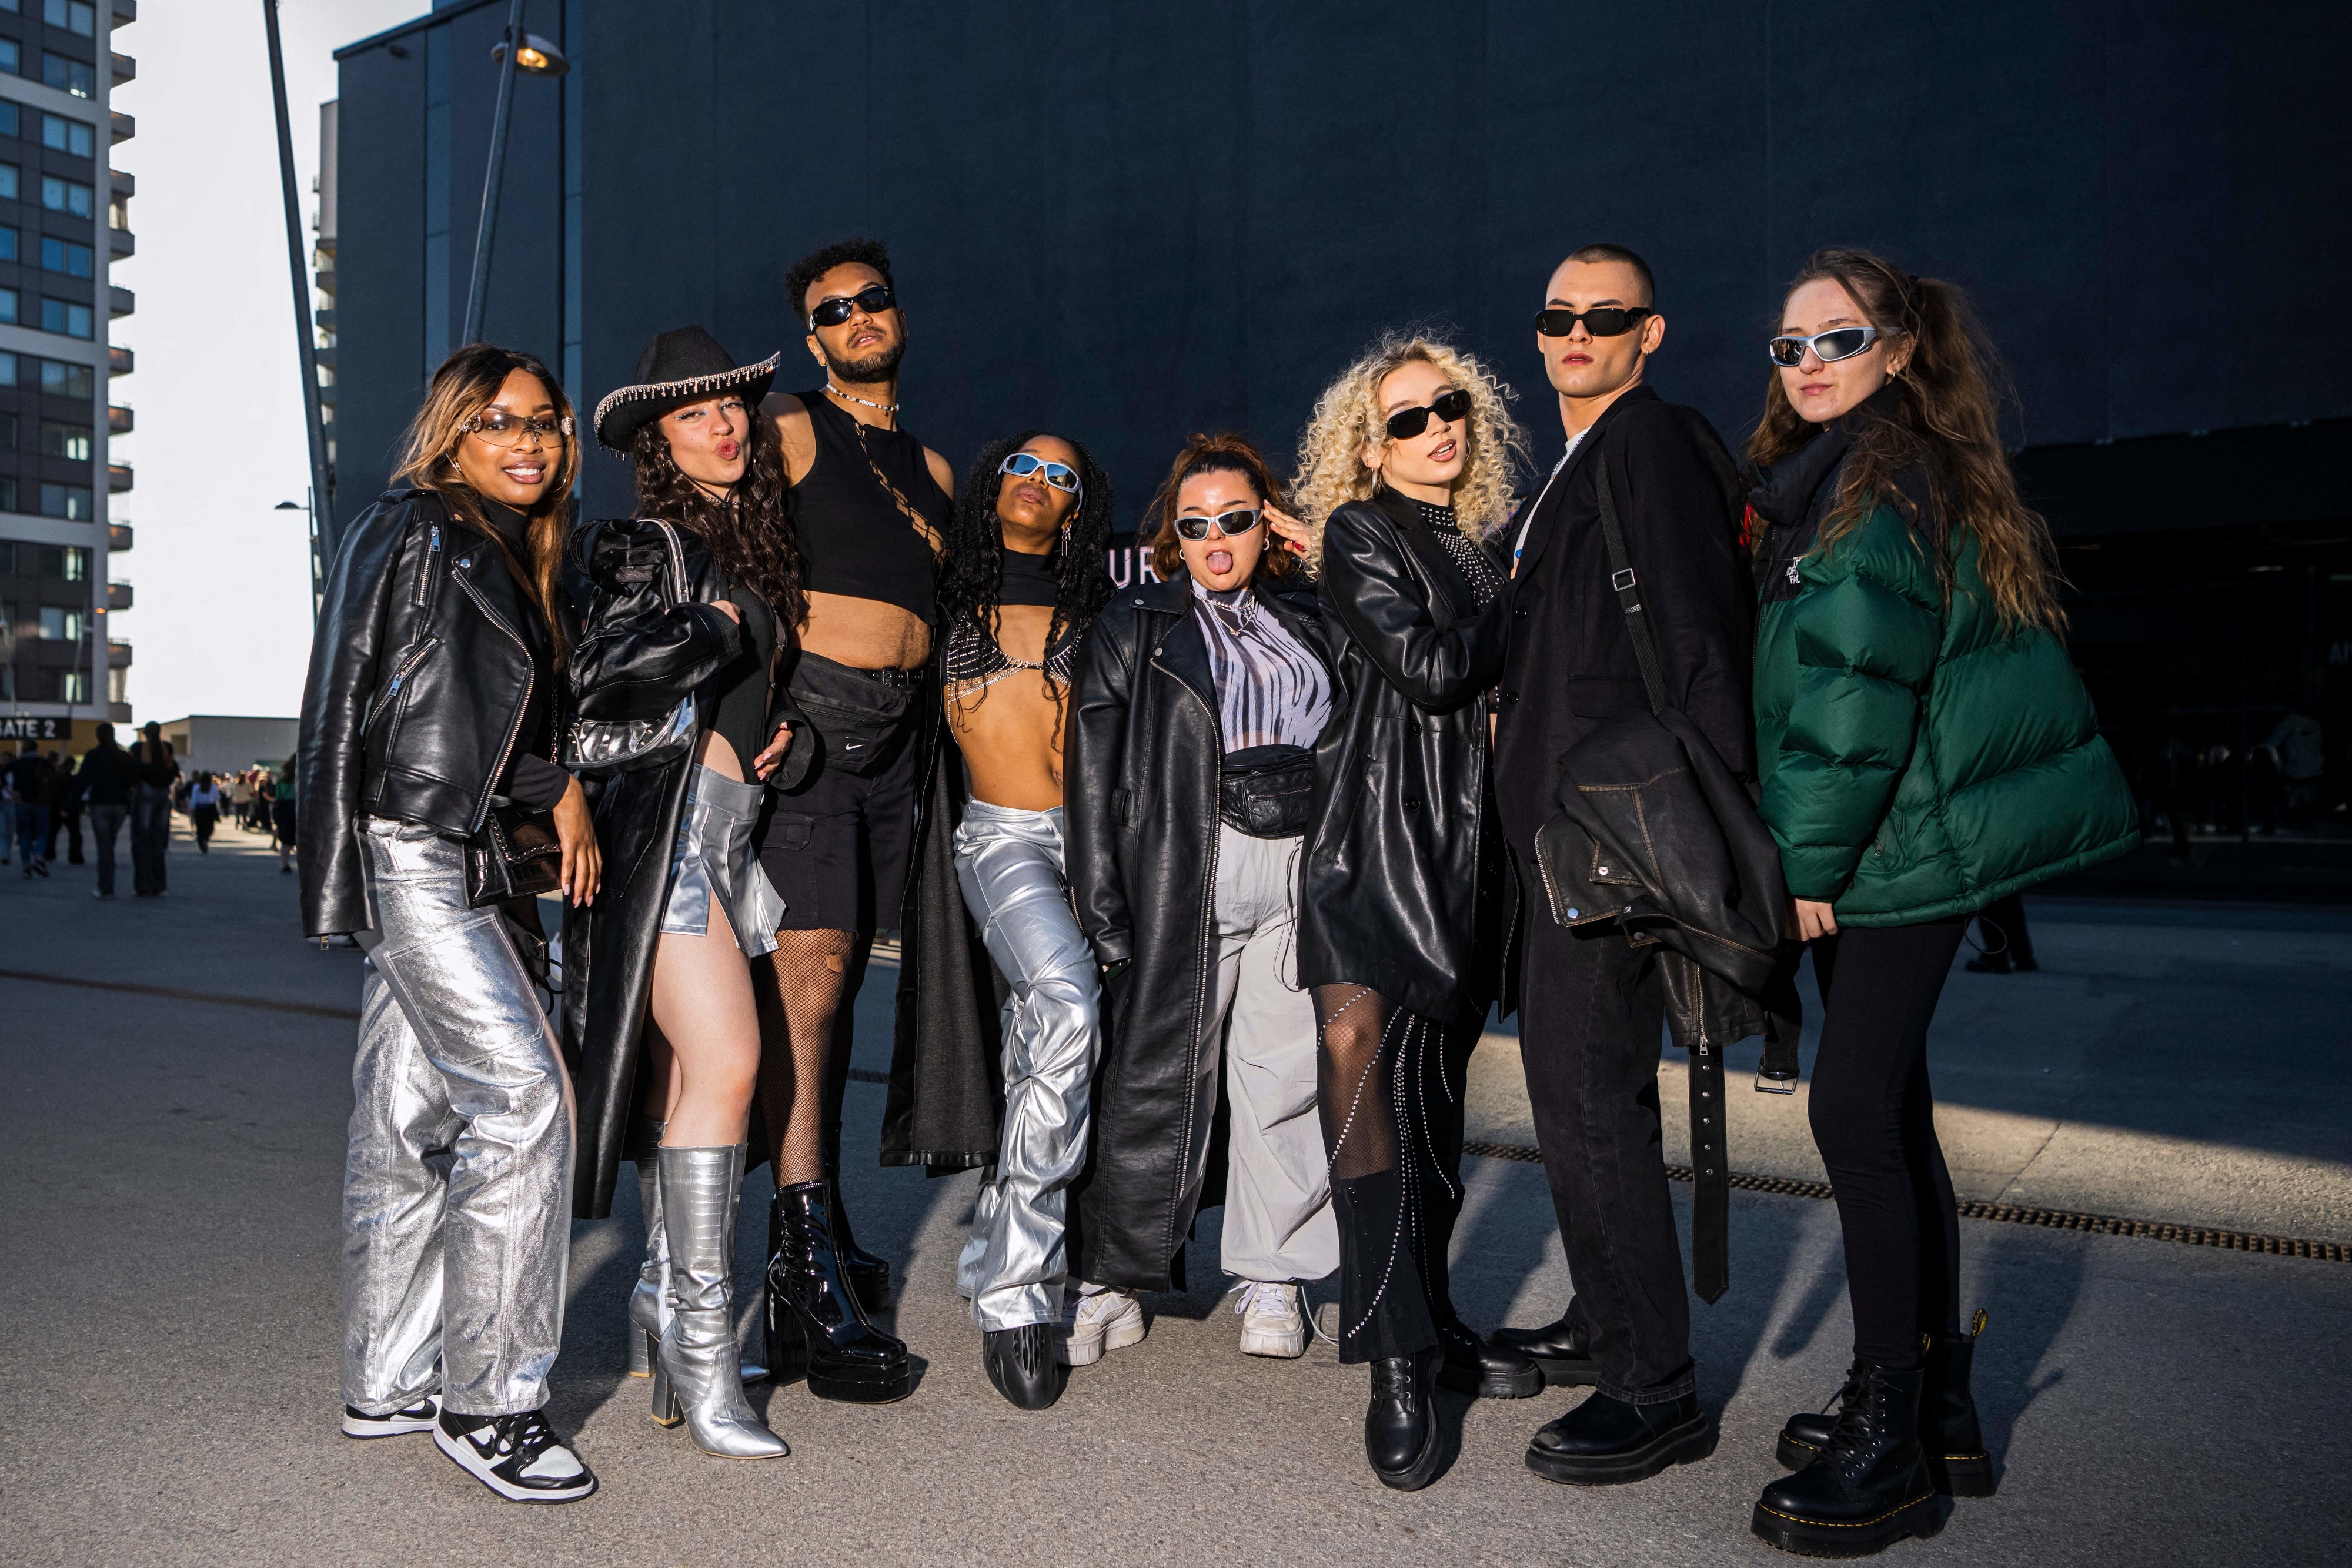 Eight people posing in sunglasses and various combos of silver and black clothing